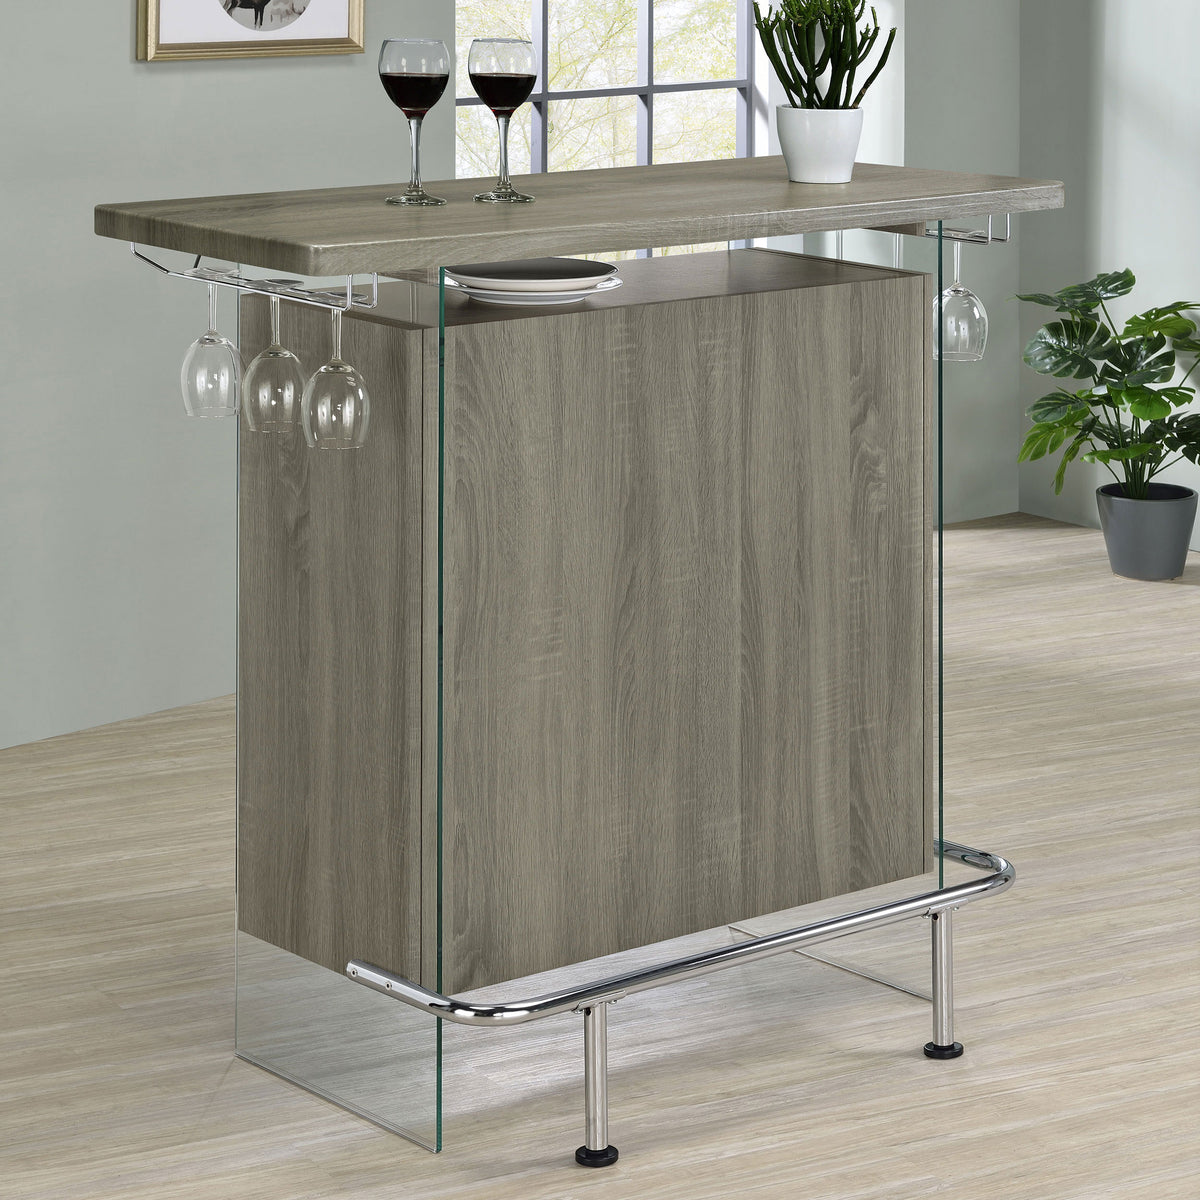 Acosta Rectangular Bar Unit with Footrest and Glass Side Panels  Half Price Furniture